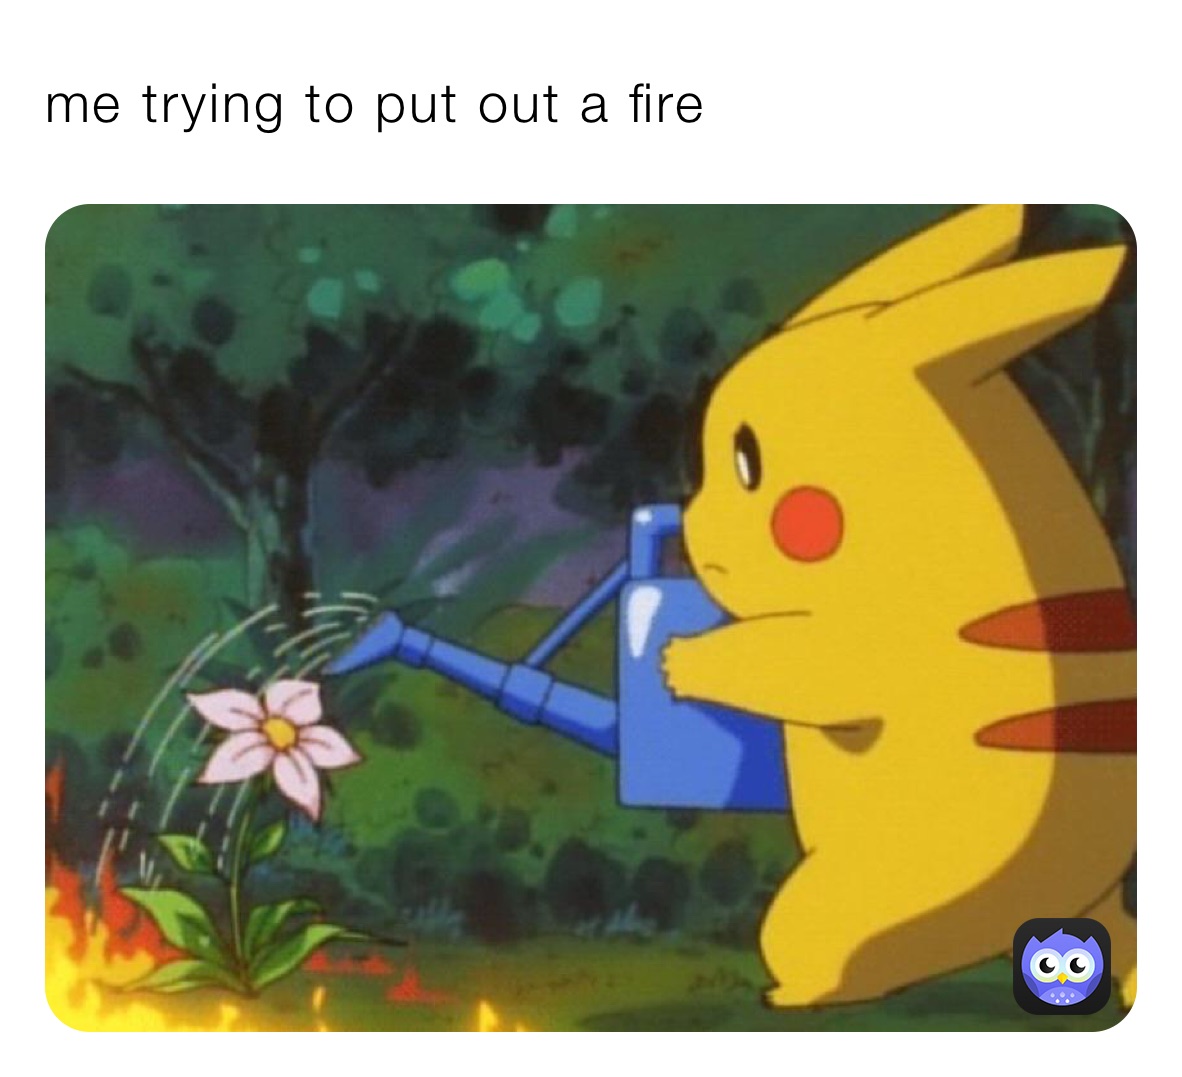 me trying to put out a fire